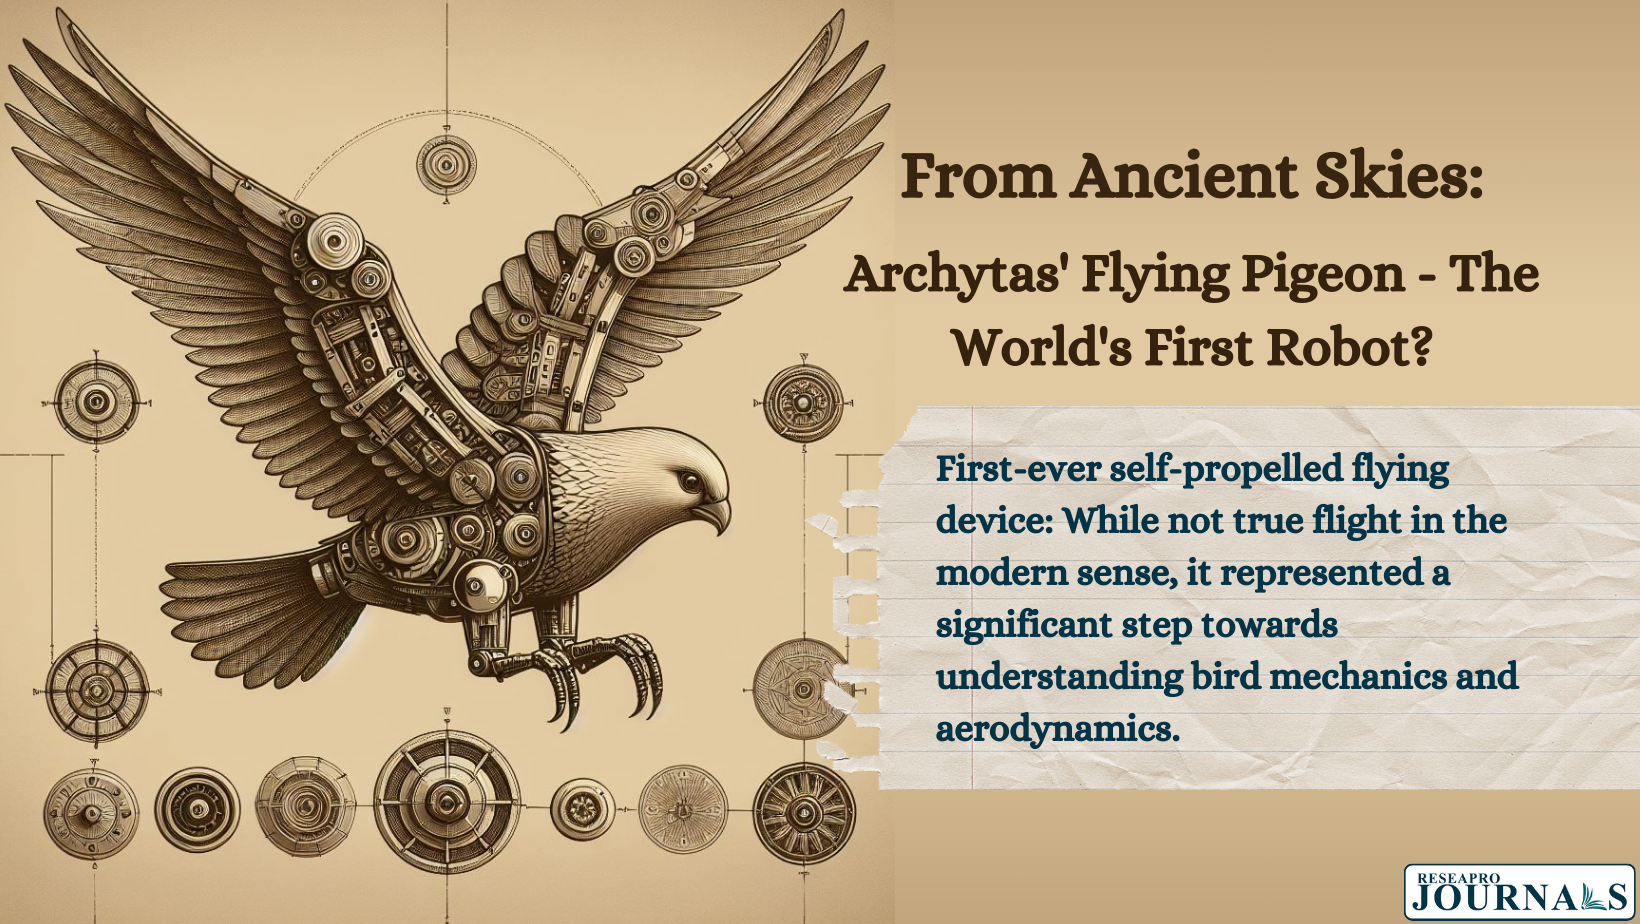 Archytas’ Flying Pigeon – The World’s First Robot?